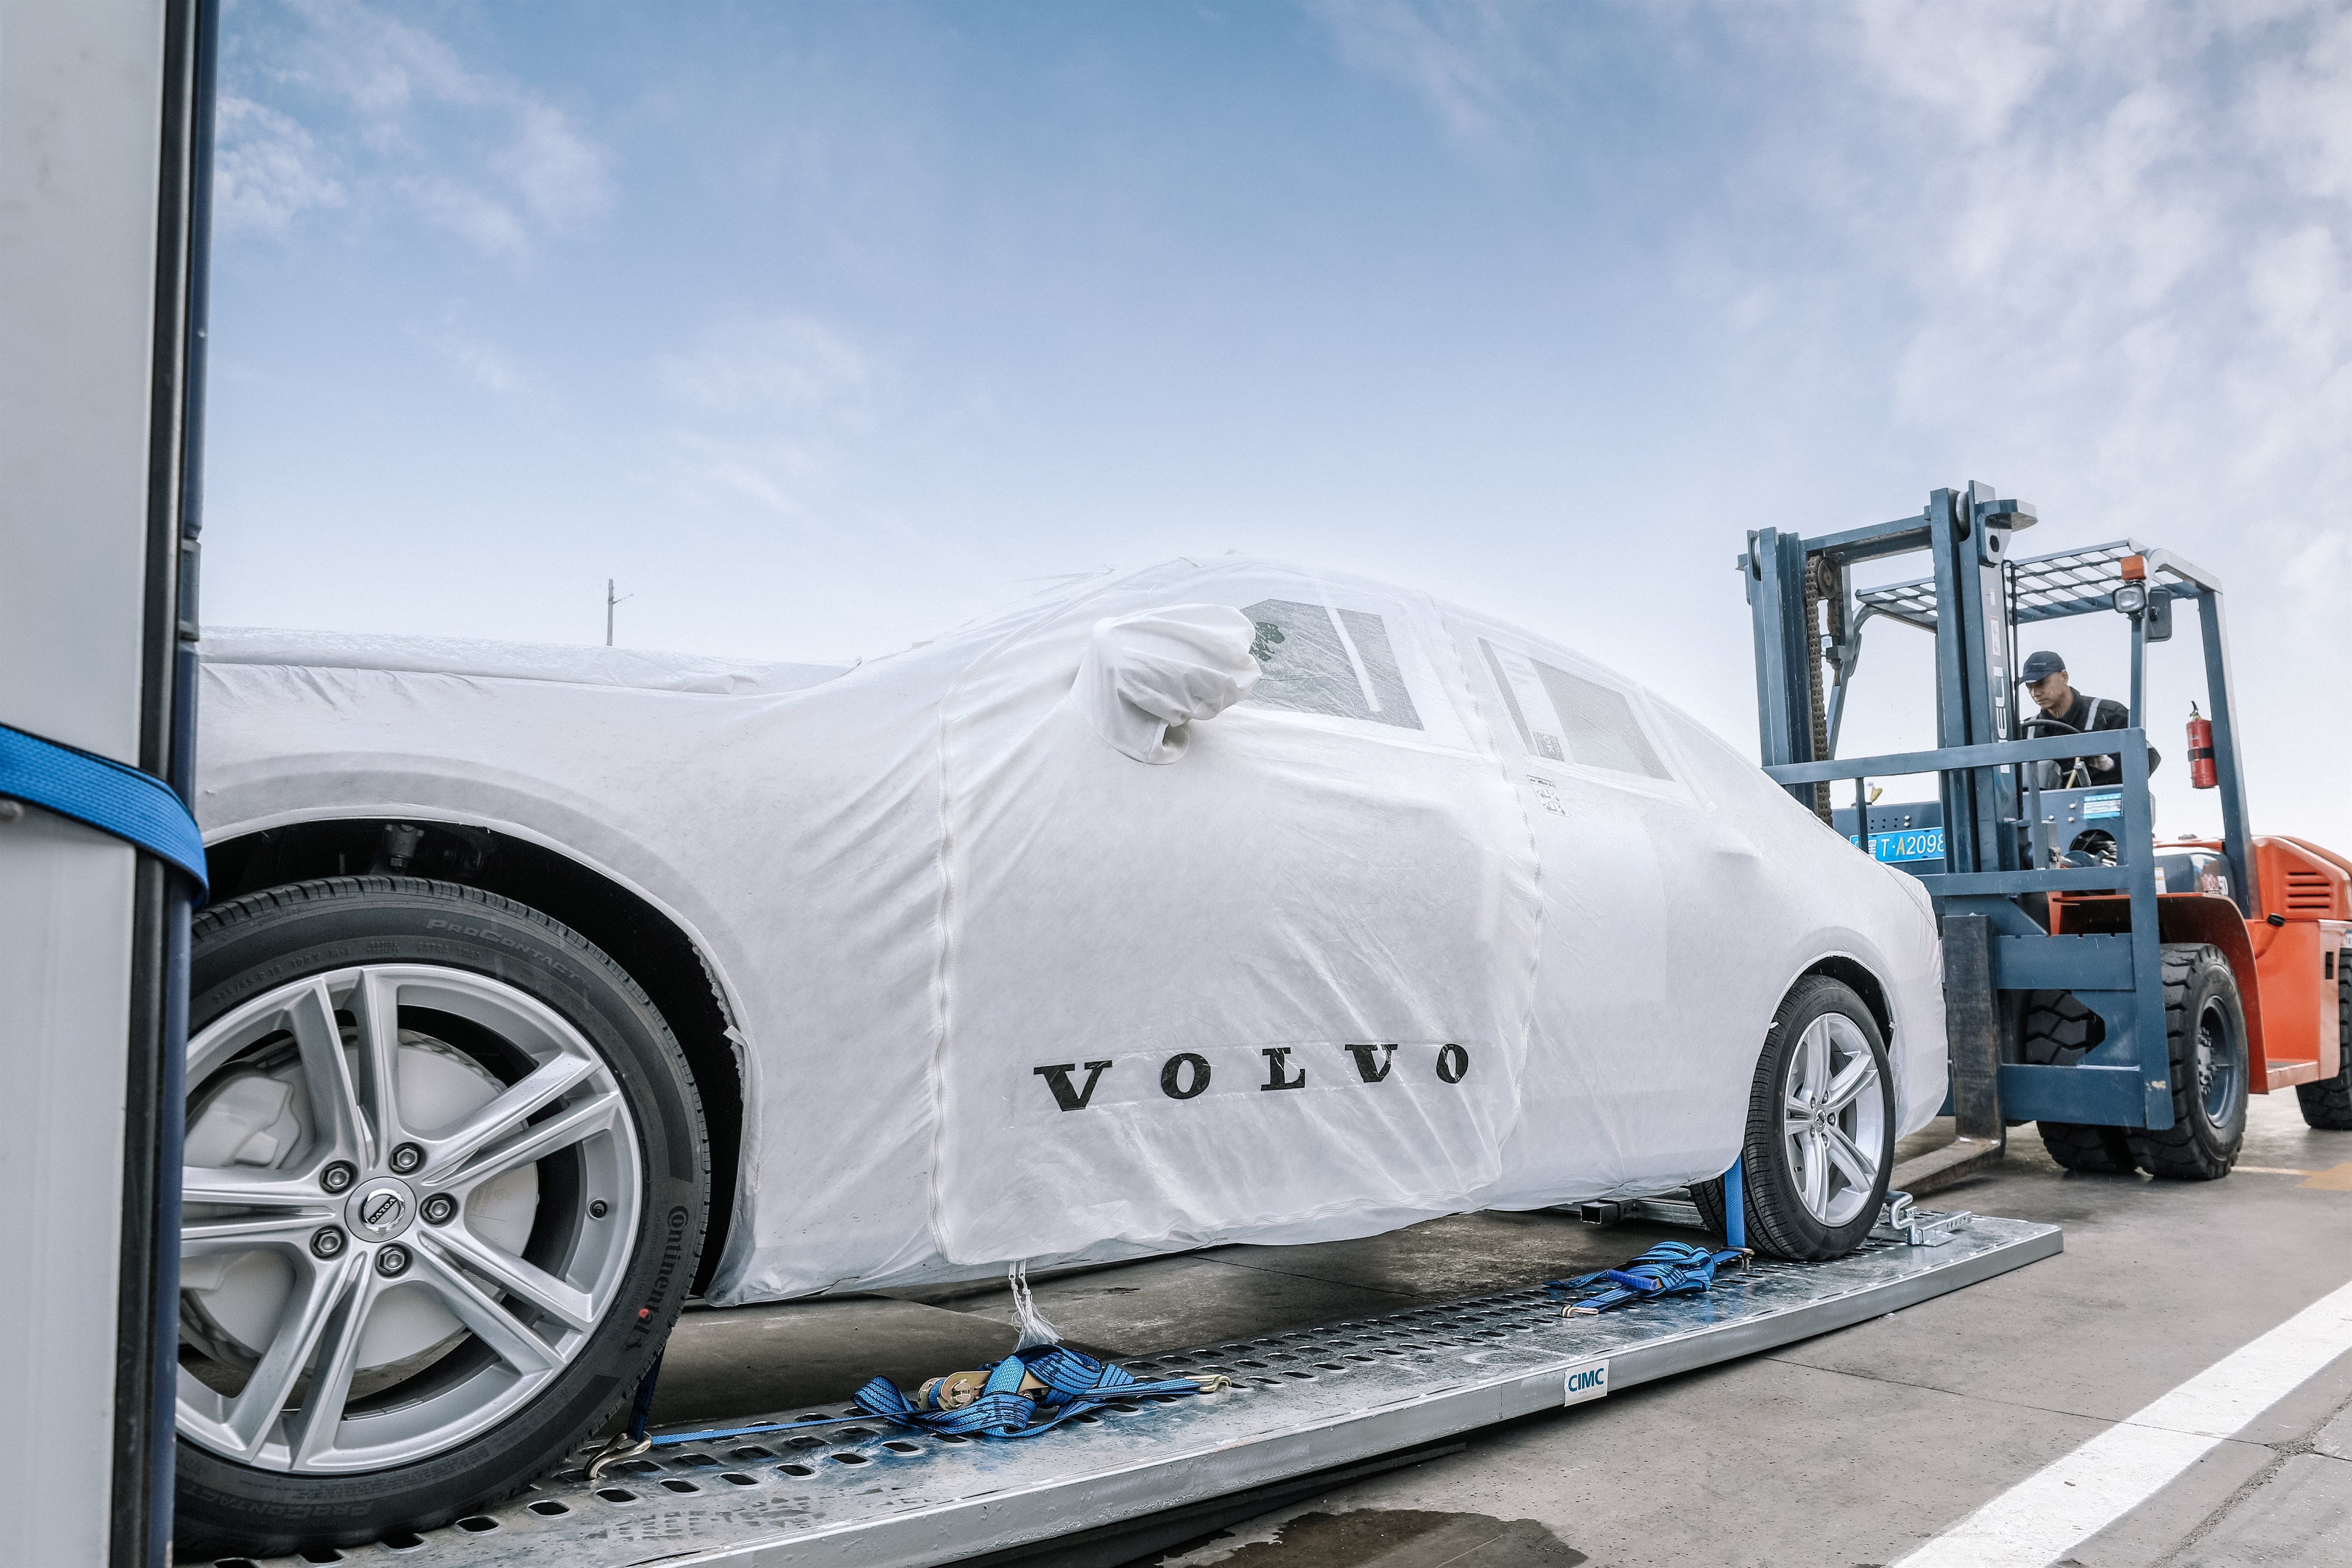 Volvo cars, made in Daqing, were transported by rail to Zeebrugge Port in Belgium, marking a first for China.